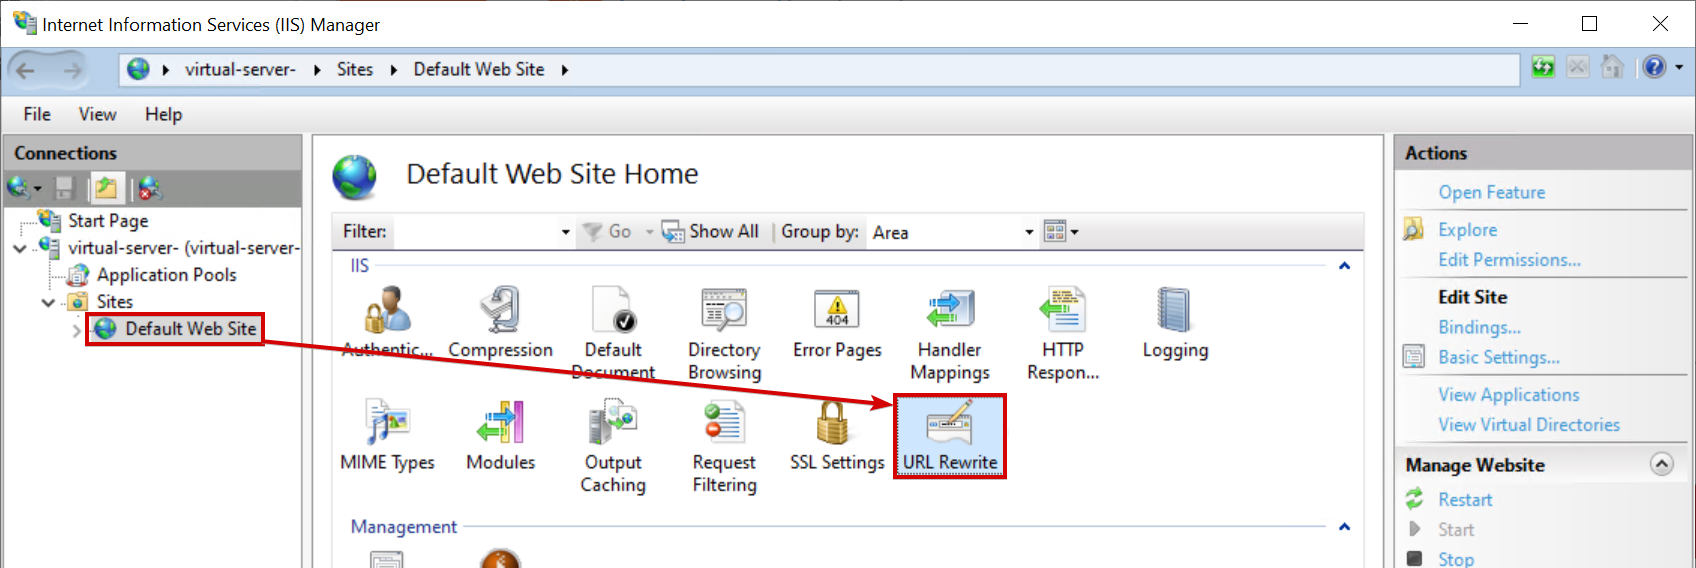 Finding the URL Rewrite Module in IIS Manager